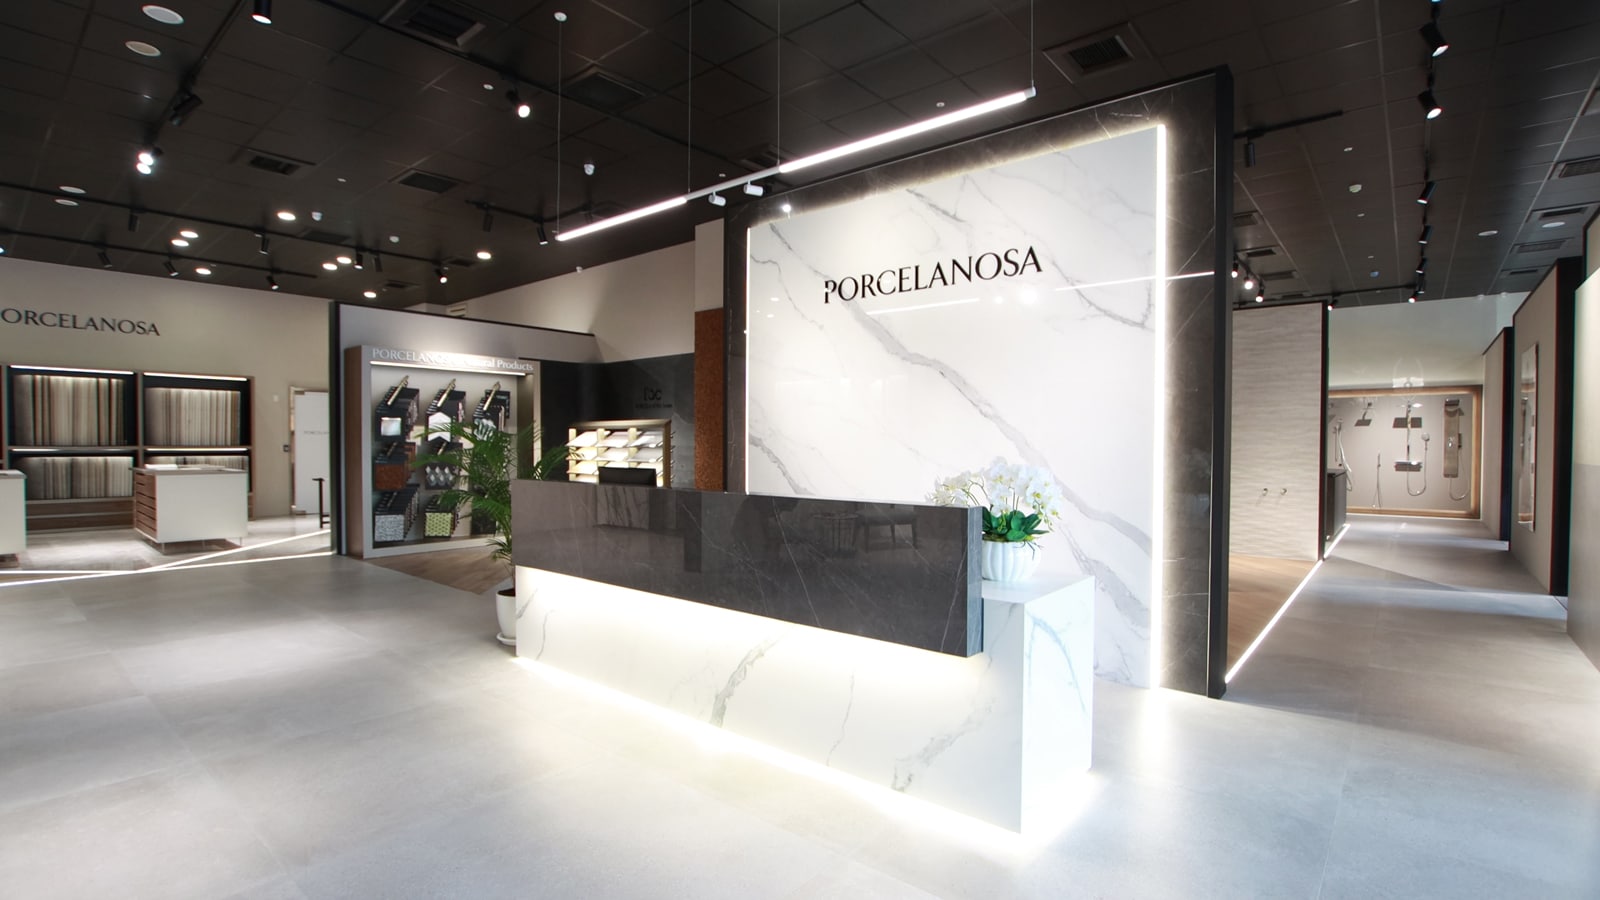 Taiwan's leading architects reflect on the future of design with collections by Porcelanosa